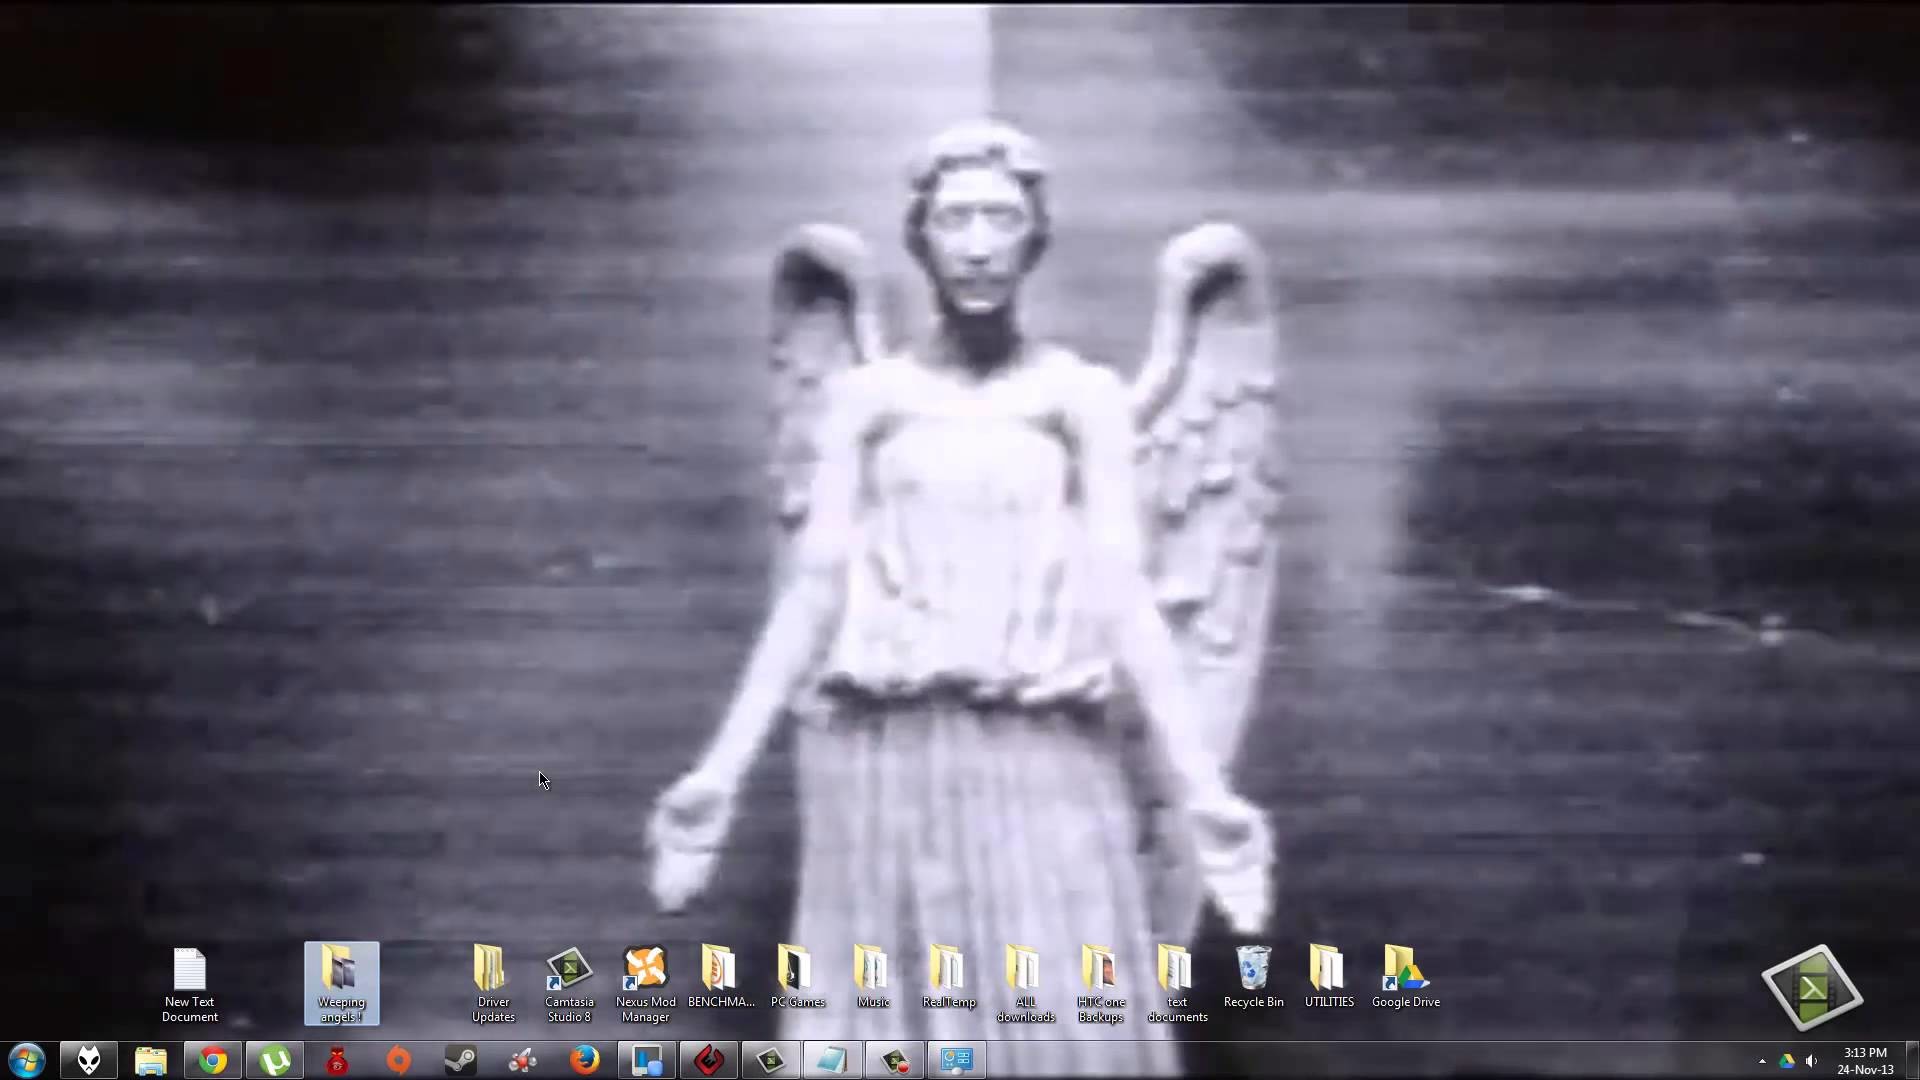 1920x1080 How to Make a Weeping Angels Animated wallpaper - YouTube